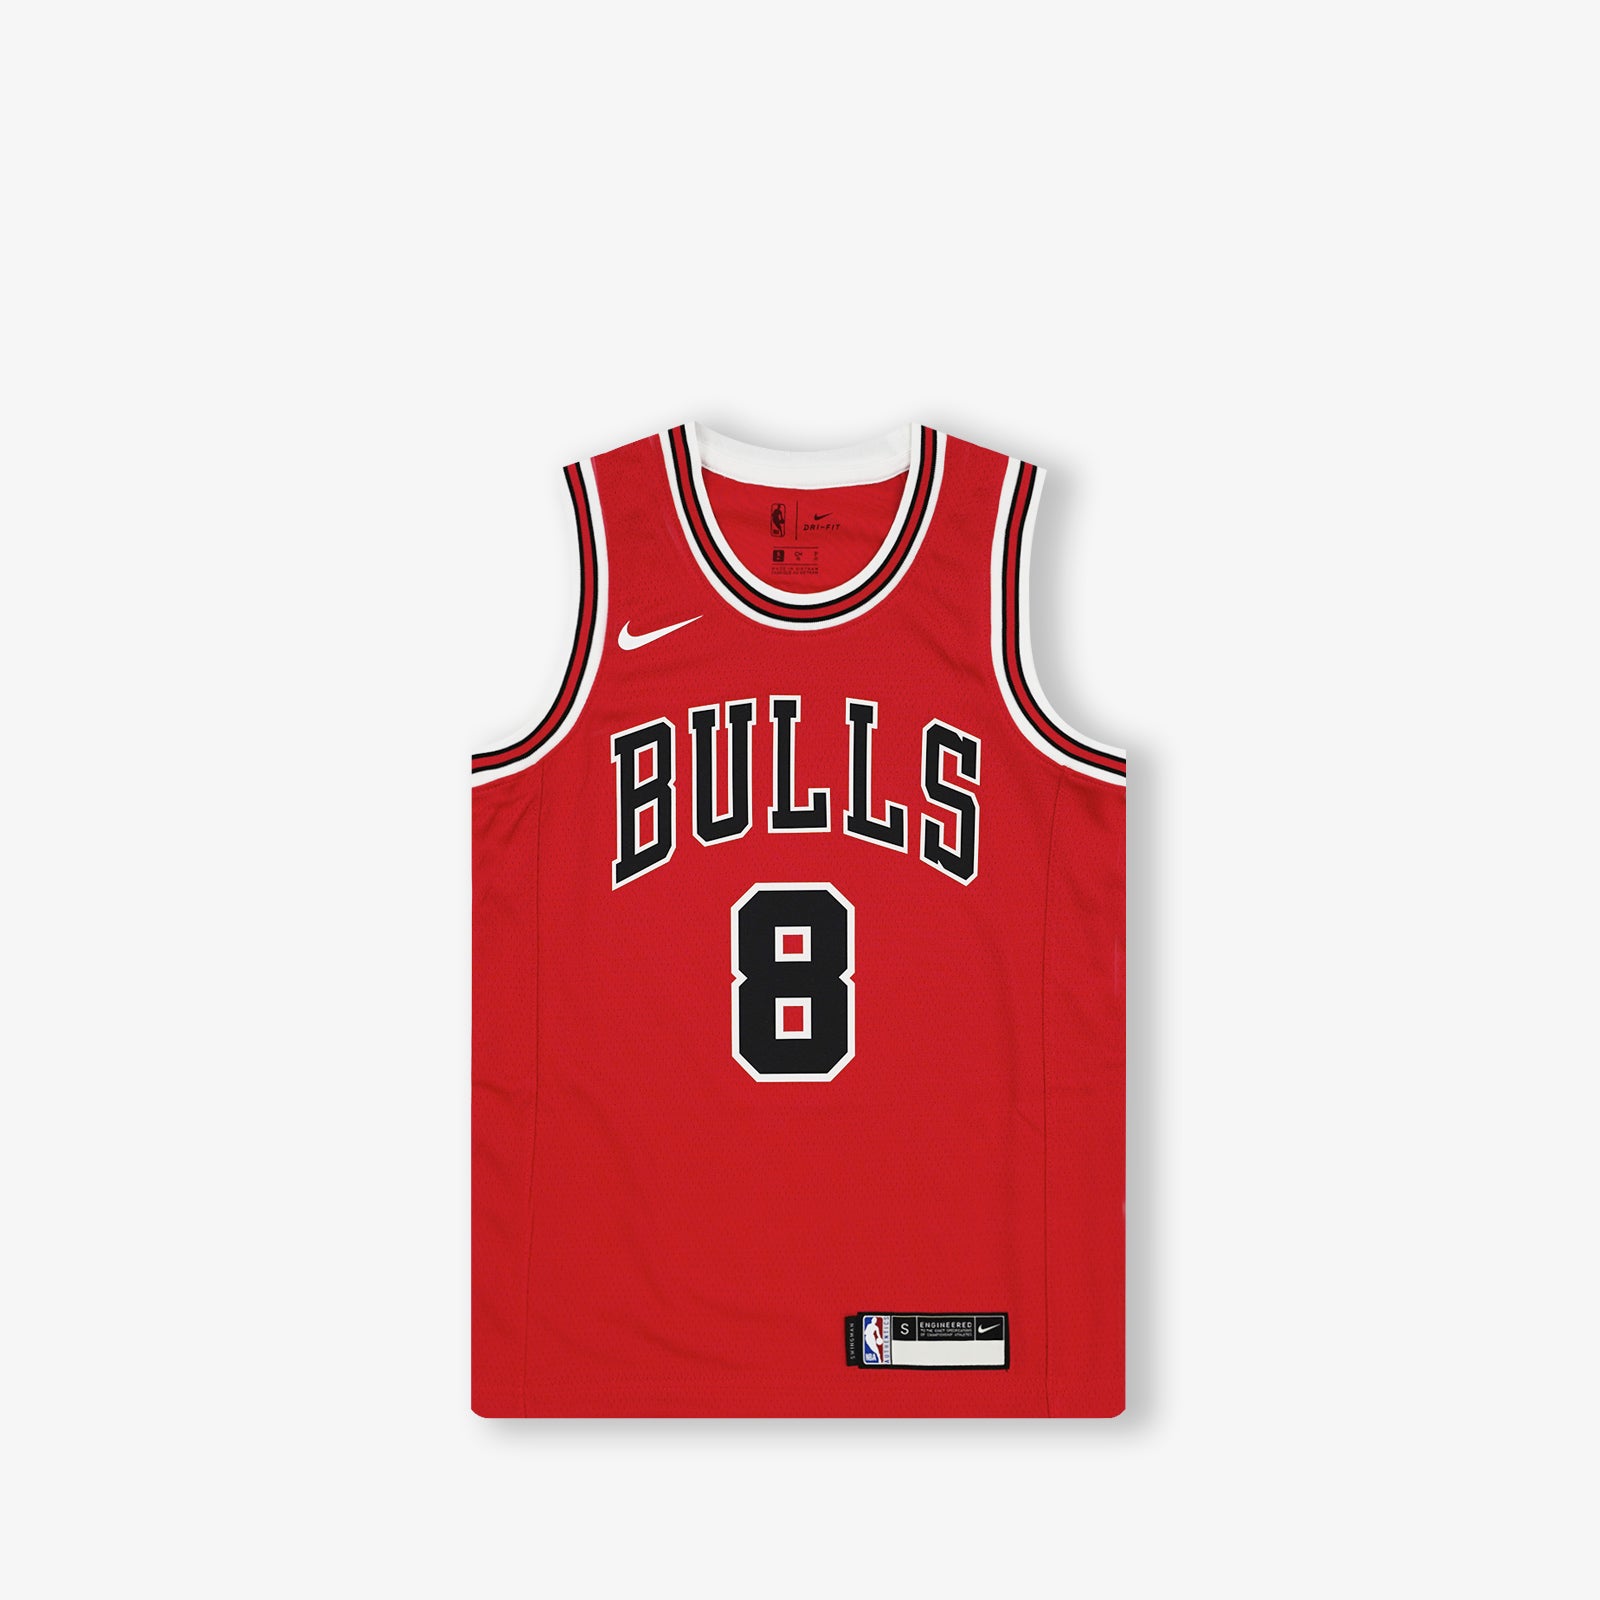 Youth Nba All Star Jerseys Luxembourg, SAVE 30% 